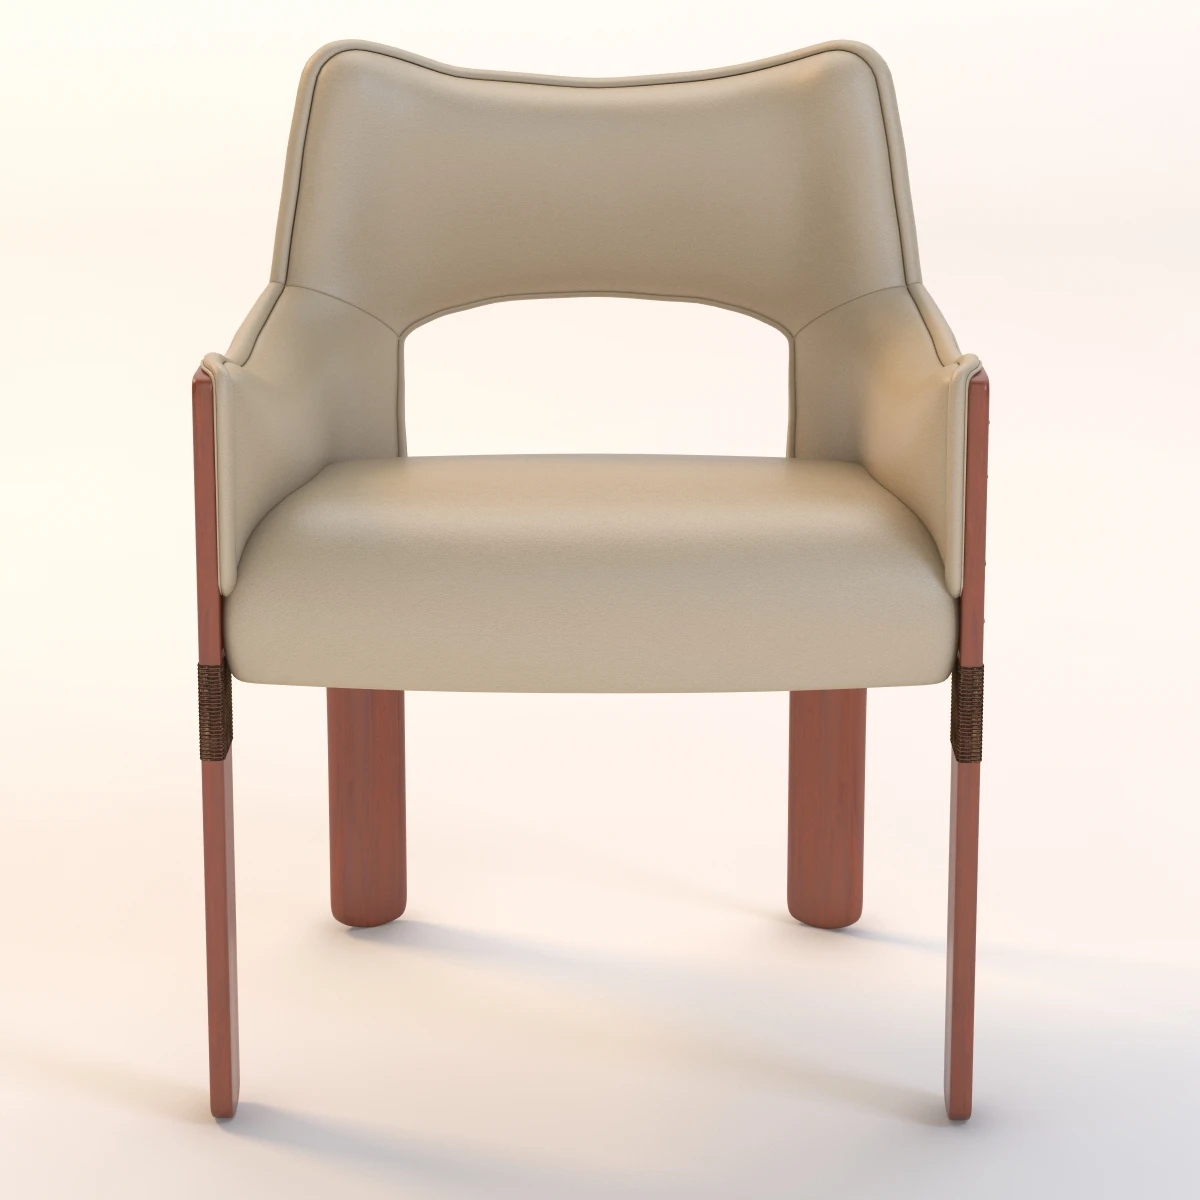 Tuvalu Dining Chair 3D Model_08